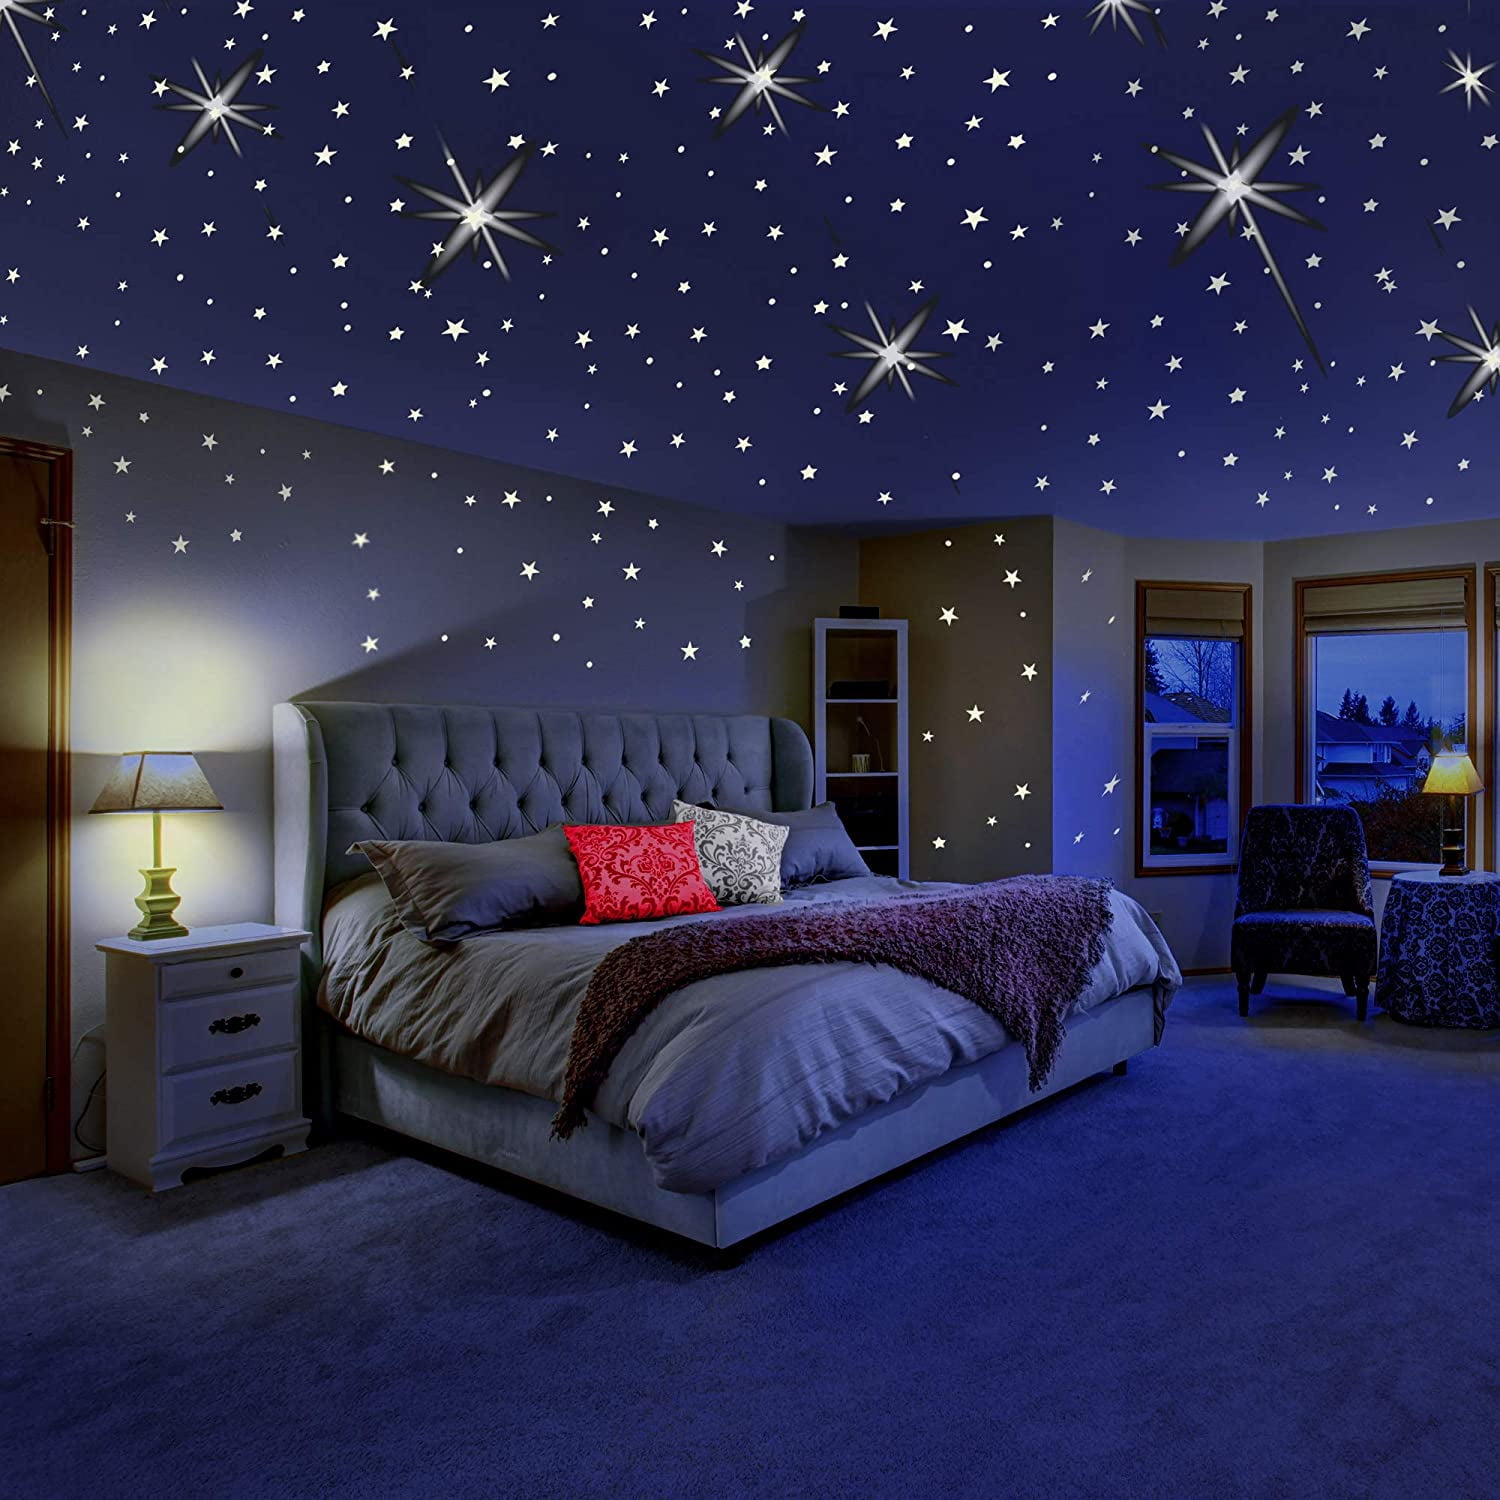 Glow In The Dark Stars For Ceiling Or Wall Stickers - Glowing Wall Decals  Stickers Room Decor Kit - Galaxy Glow Star Set And Solar System Decal For